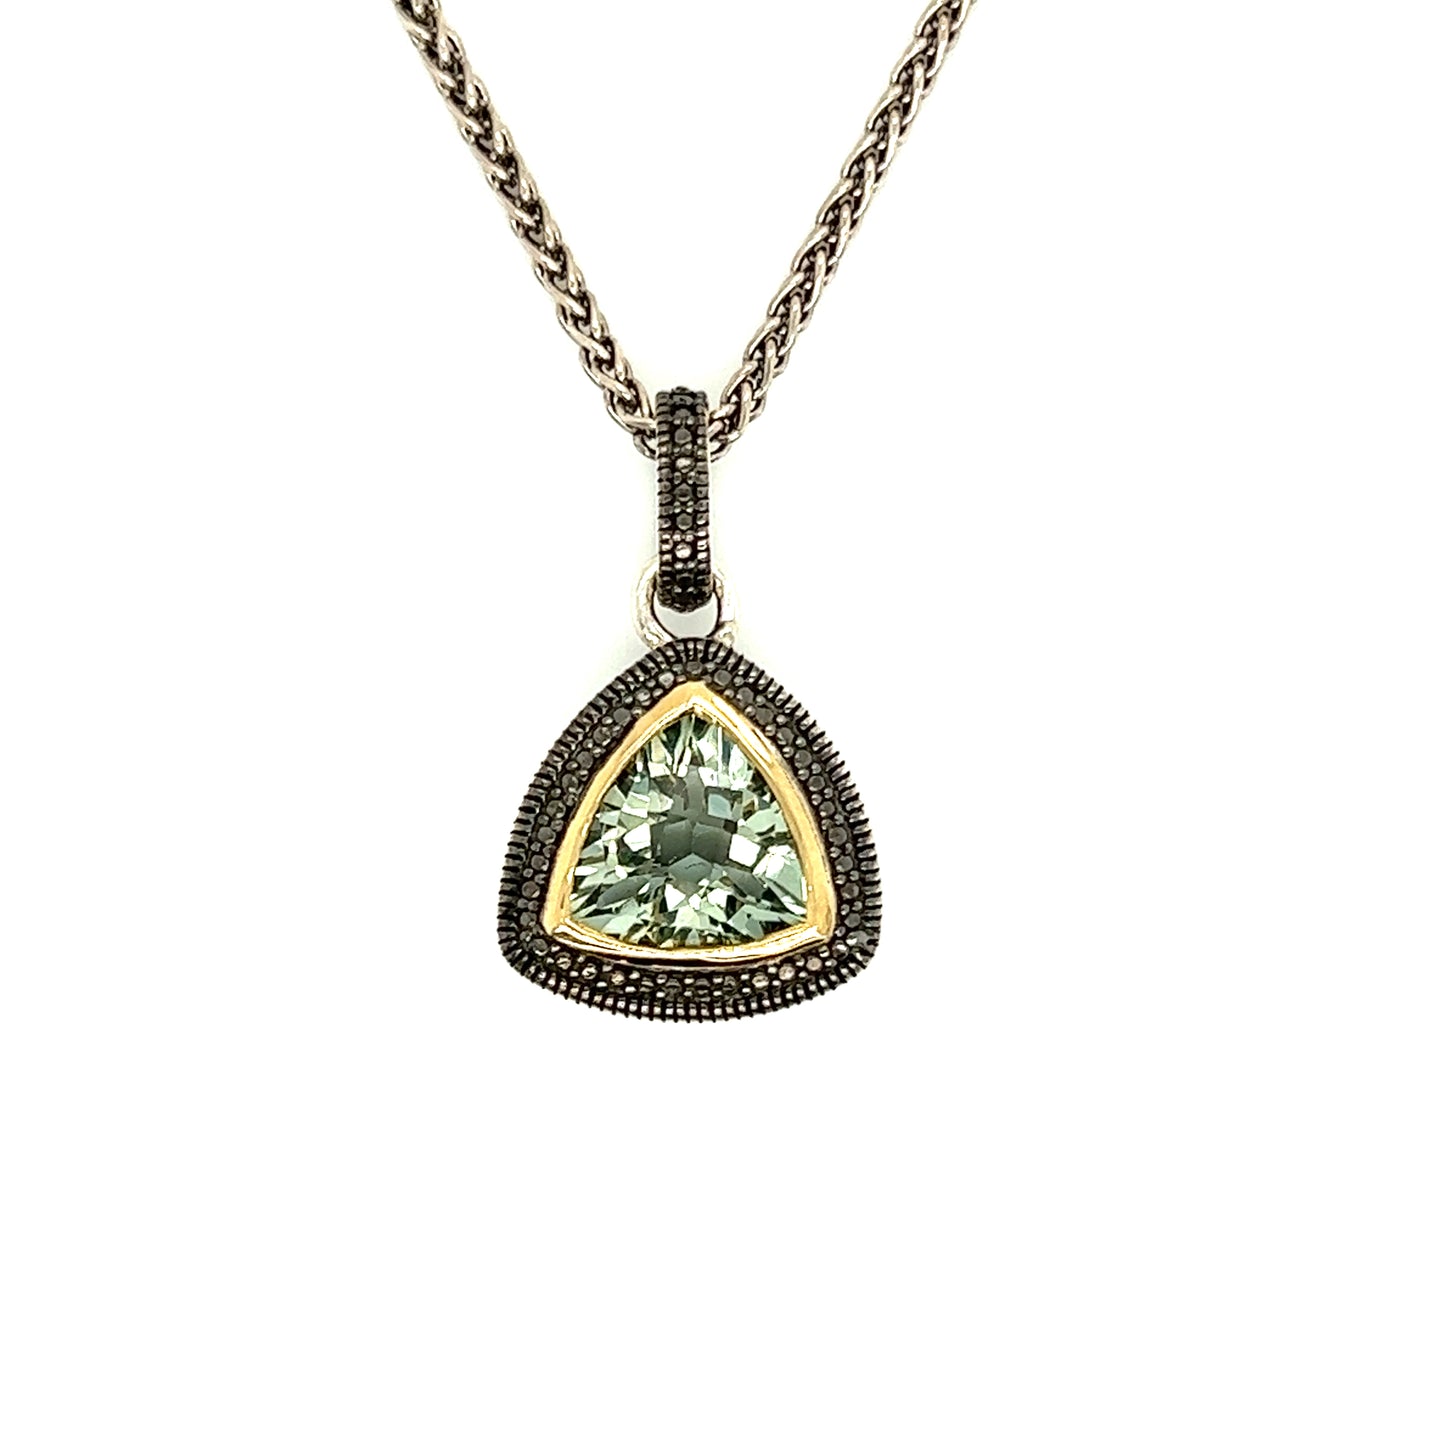 Trillion Green Quartz Antiqued Necklace with 14K Yellow Gold Accent in Sterling Silver Pendant Front View